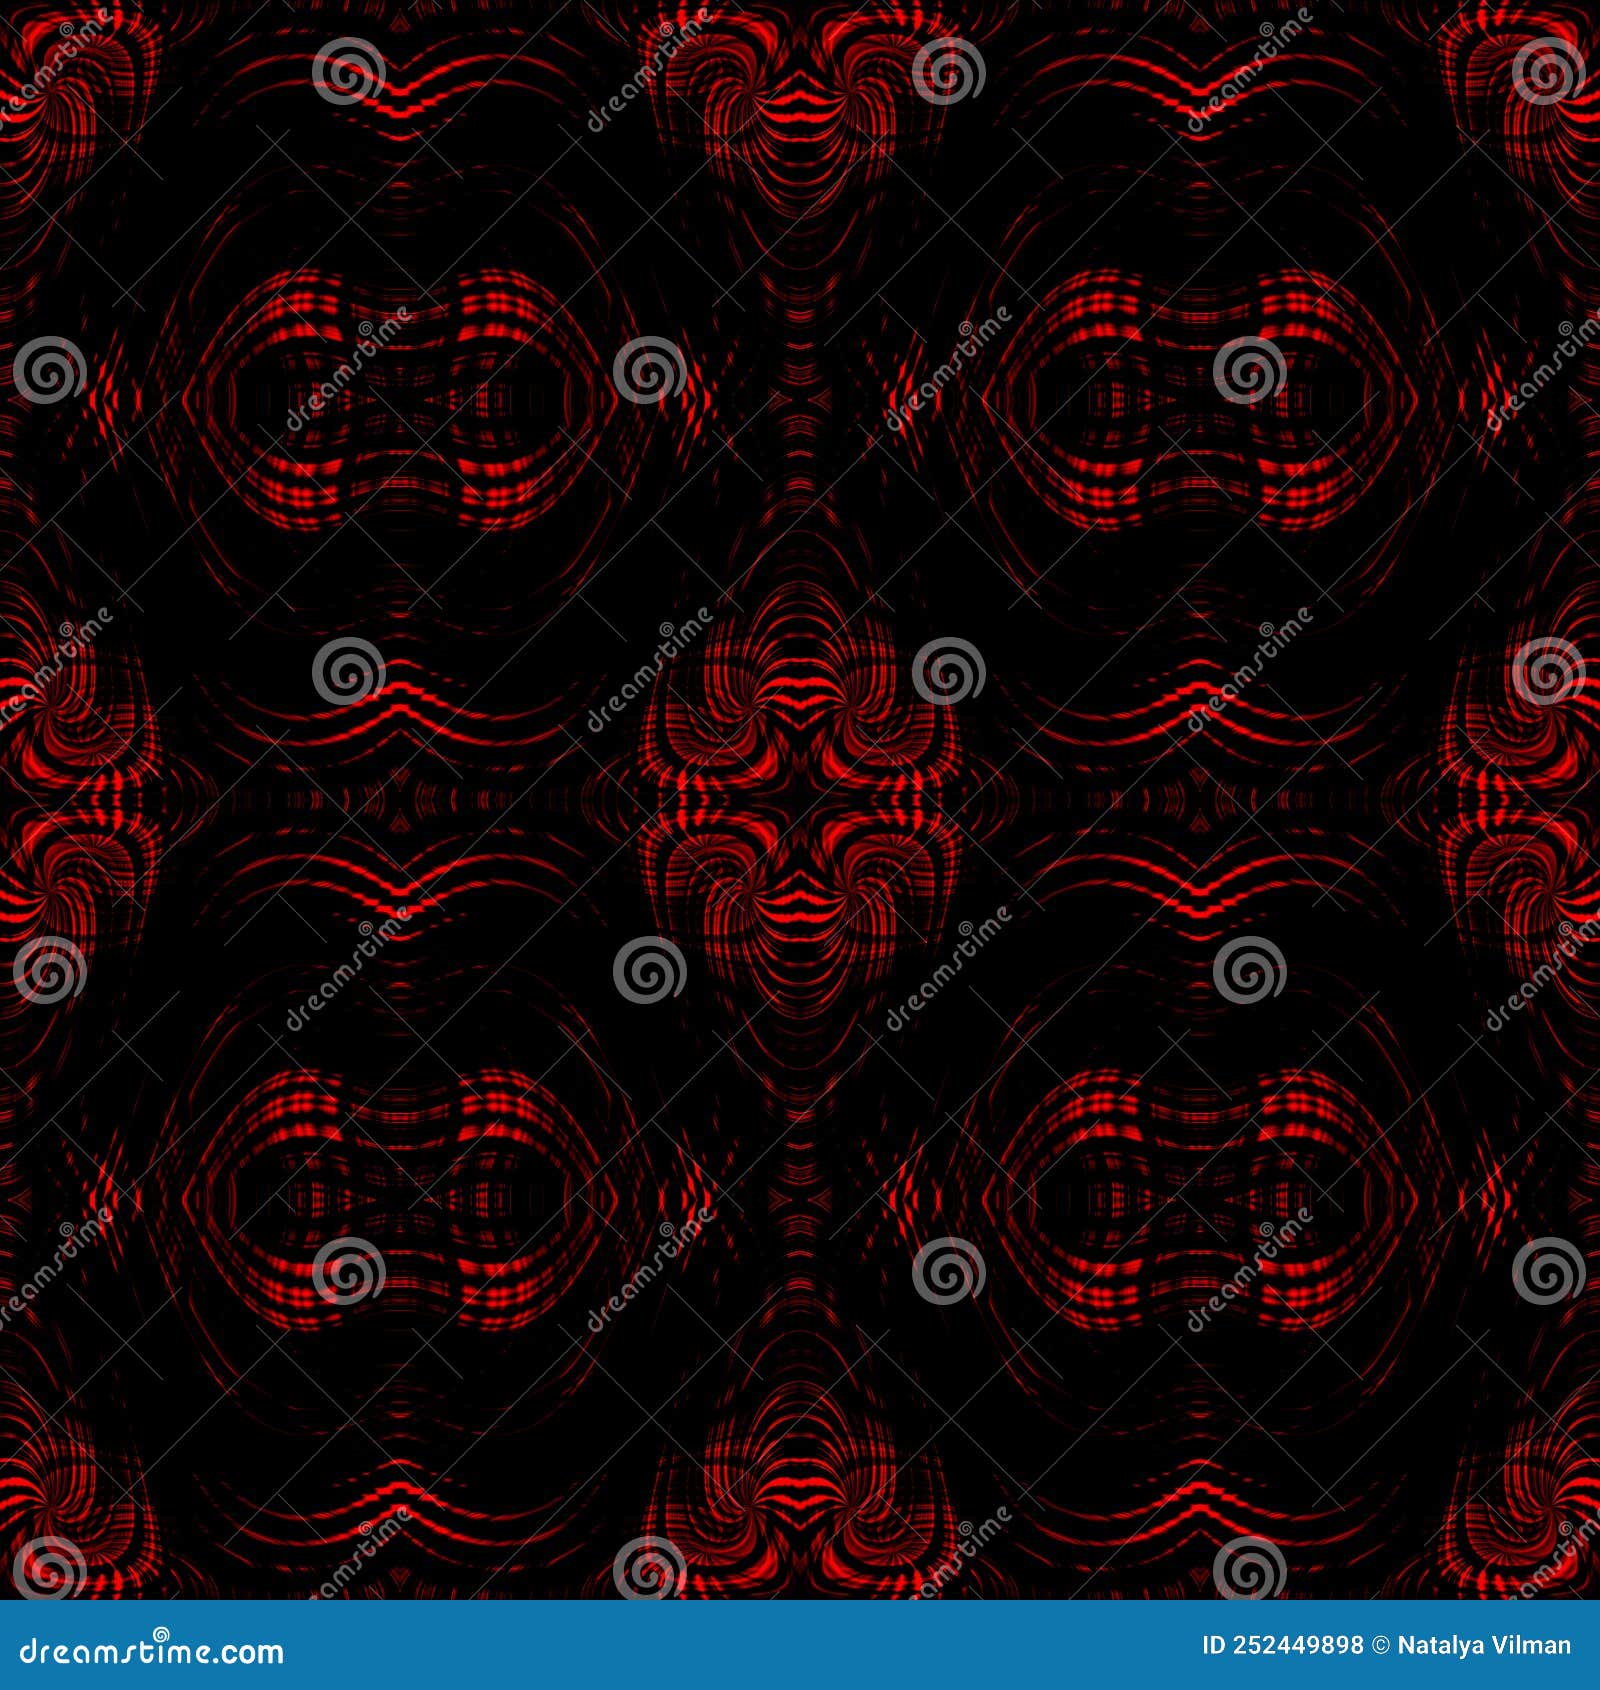 Beautiful fantasy bright red pattern on a black background.